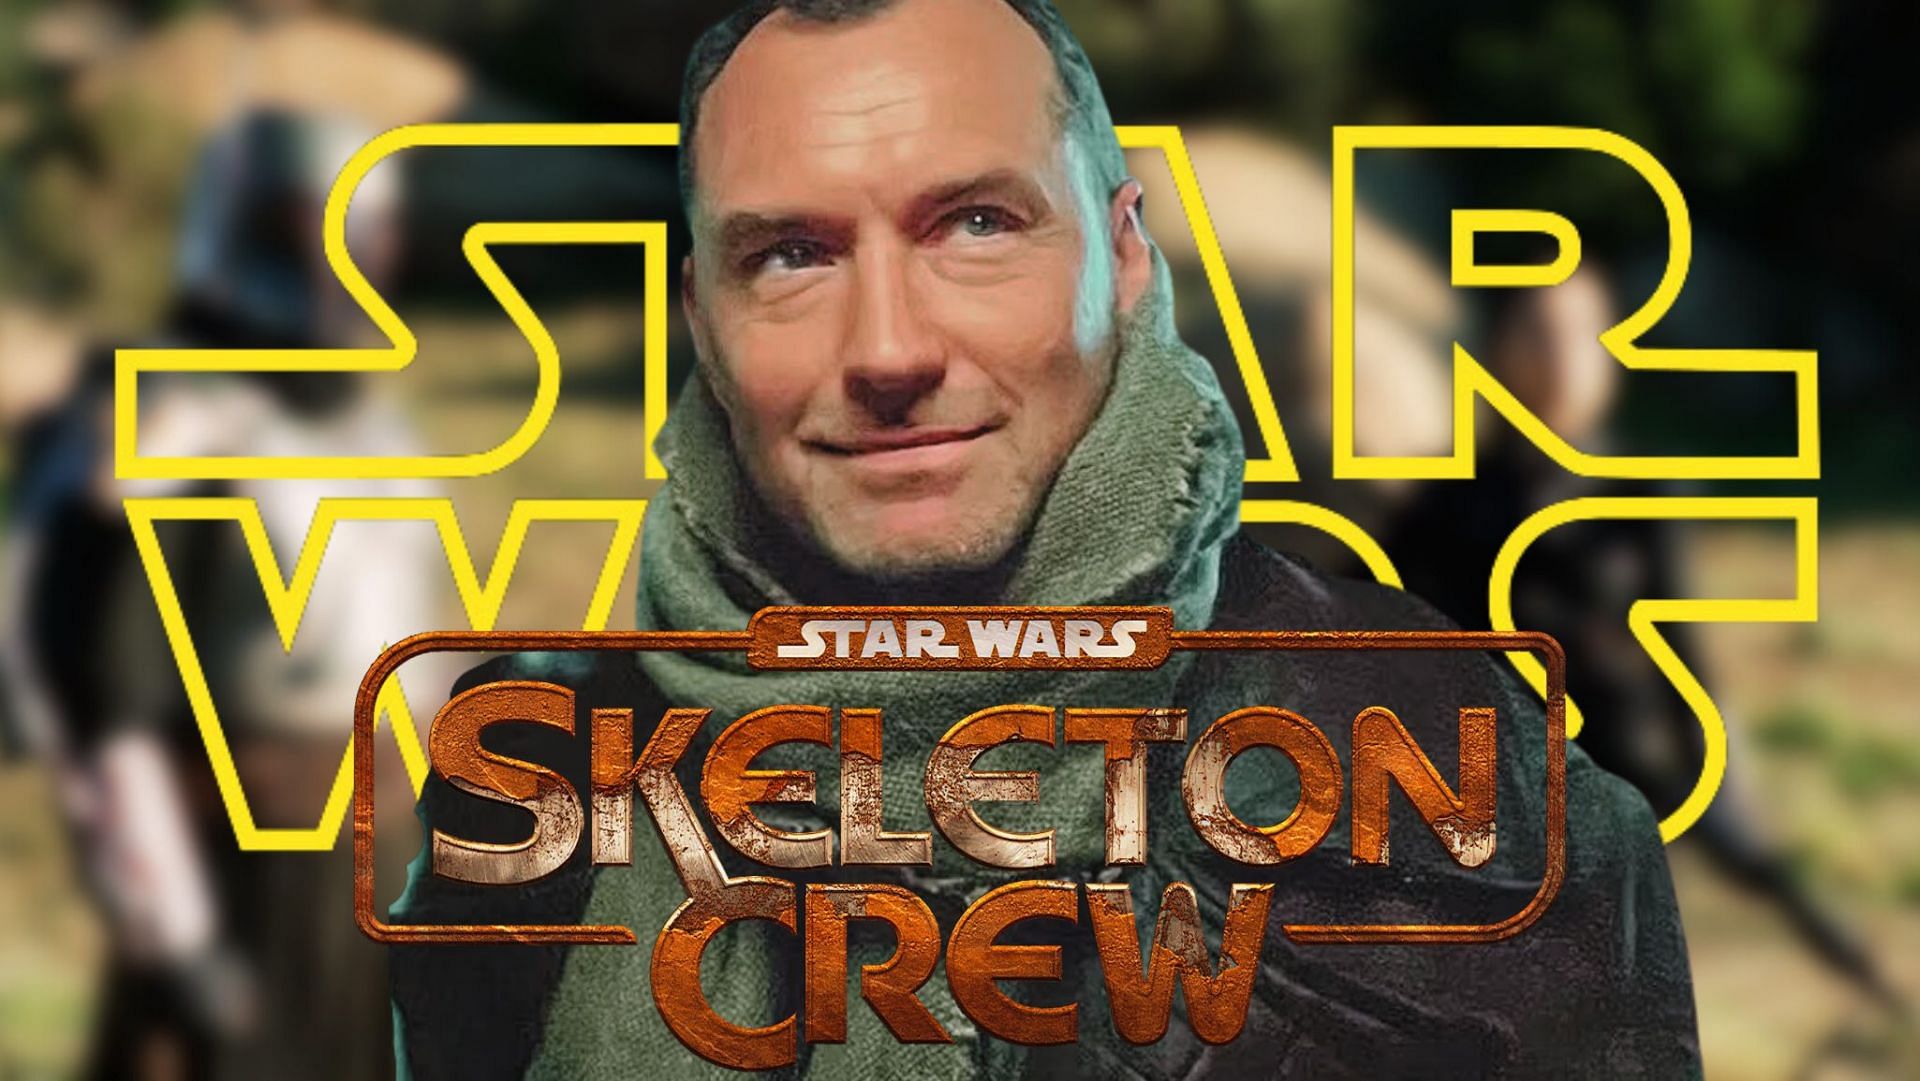 Skeleton Crew: Continuing the Disney+ tradition with 8 episodes in the Star Wars universe (Image via Sportskeeda)